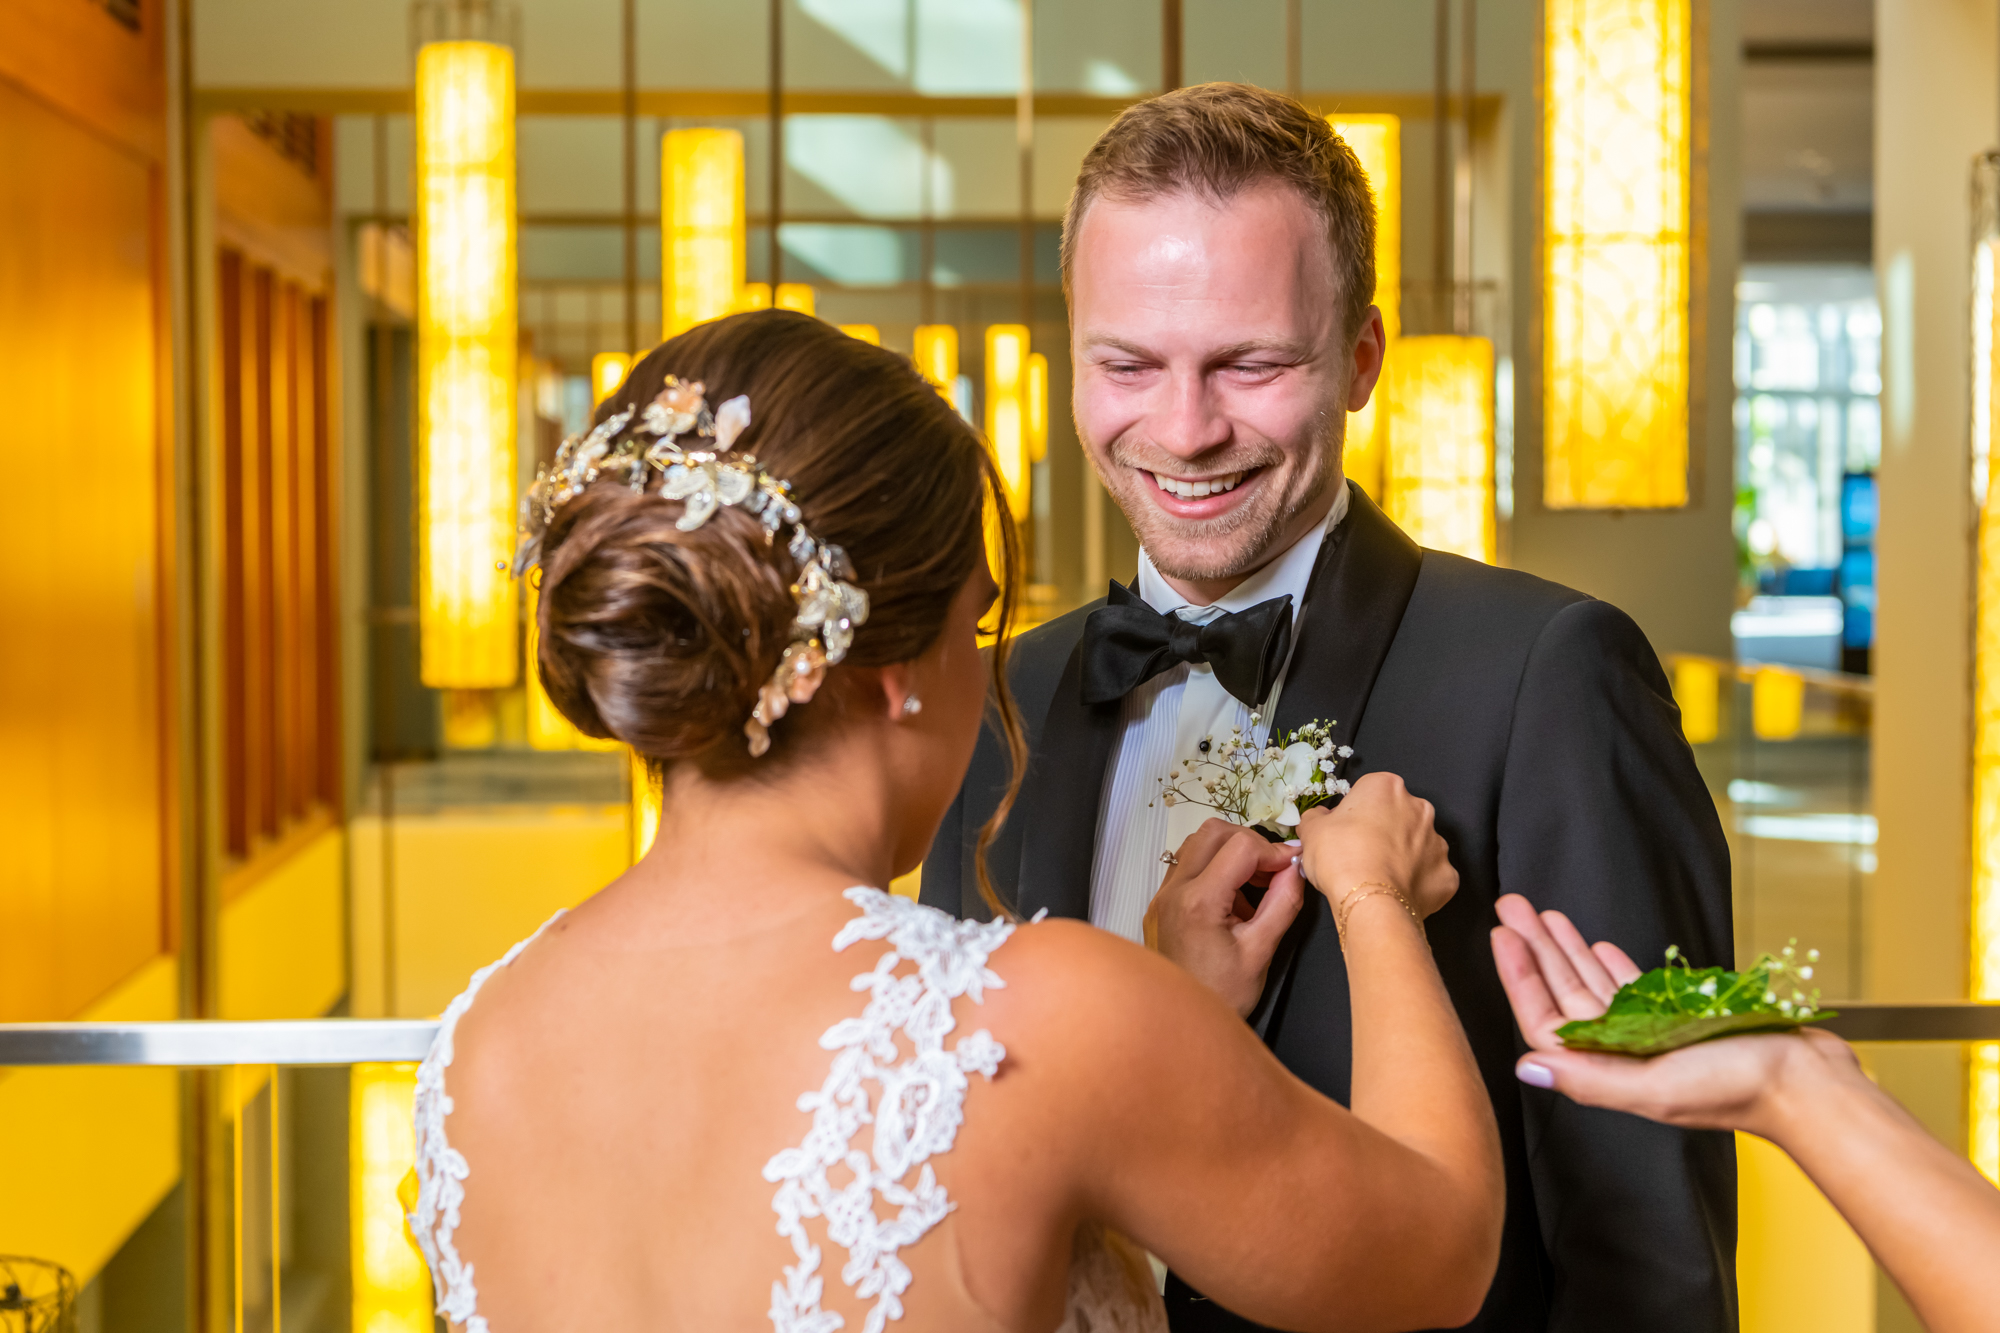 Bride helping to put groom's boutonniere